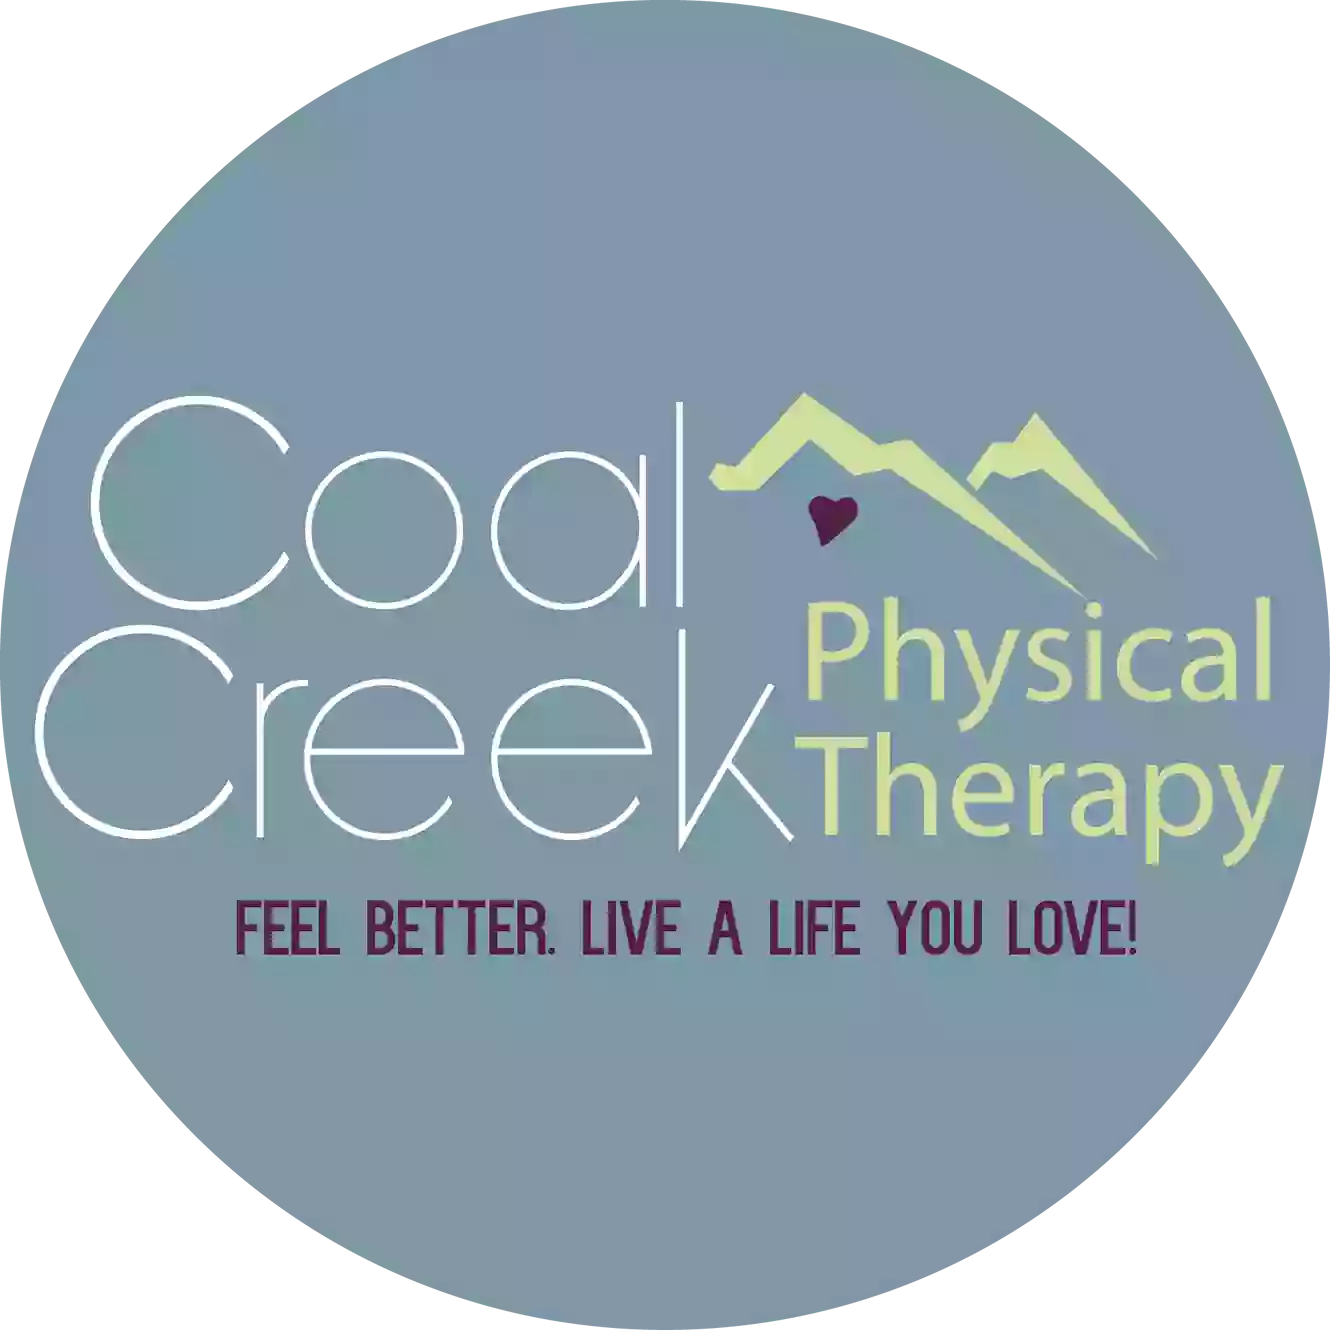 Coal Creek Physical Therapy - Boulder